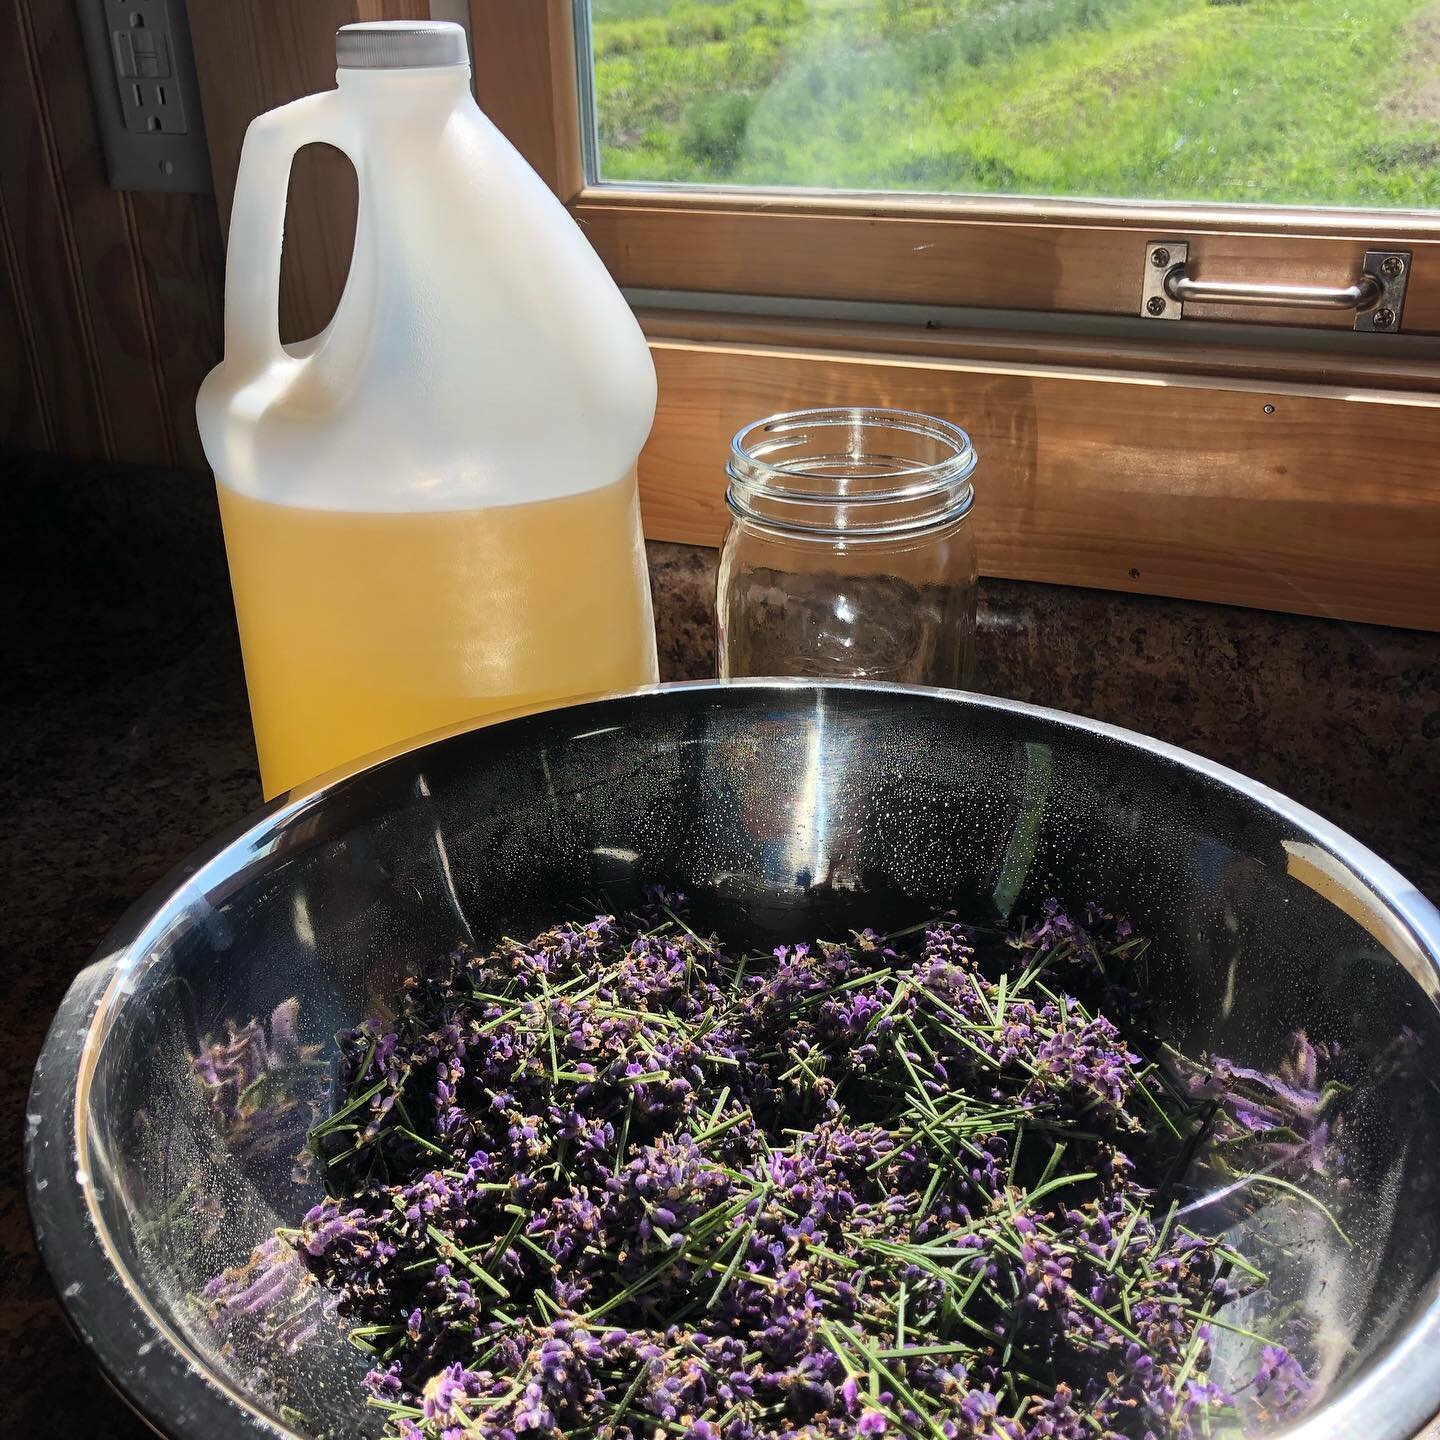 Making fresh lavender infused sunflower oil for our Garden Faery Salve. 
🌾
Come learn how to make your own medicinal herb infused oils and healing salves with herbalist Melanie Yukov.
🌱
DIY Make a Healing Salve
Sunday, July 11th : 11am-1pm
@maplesp